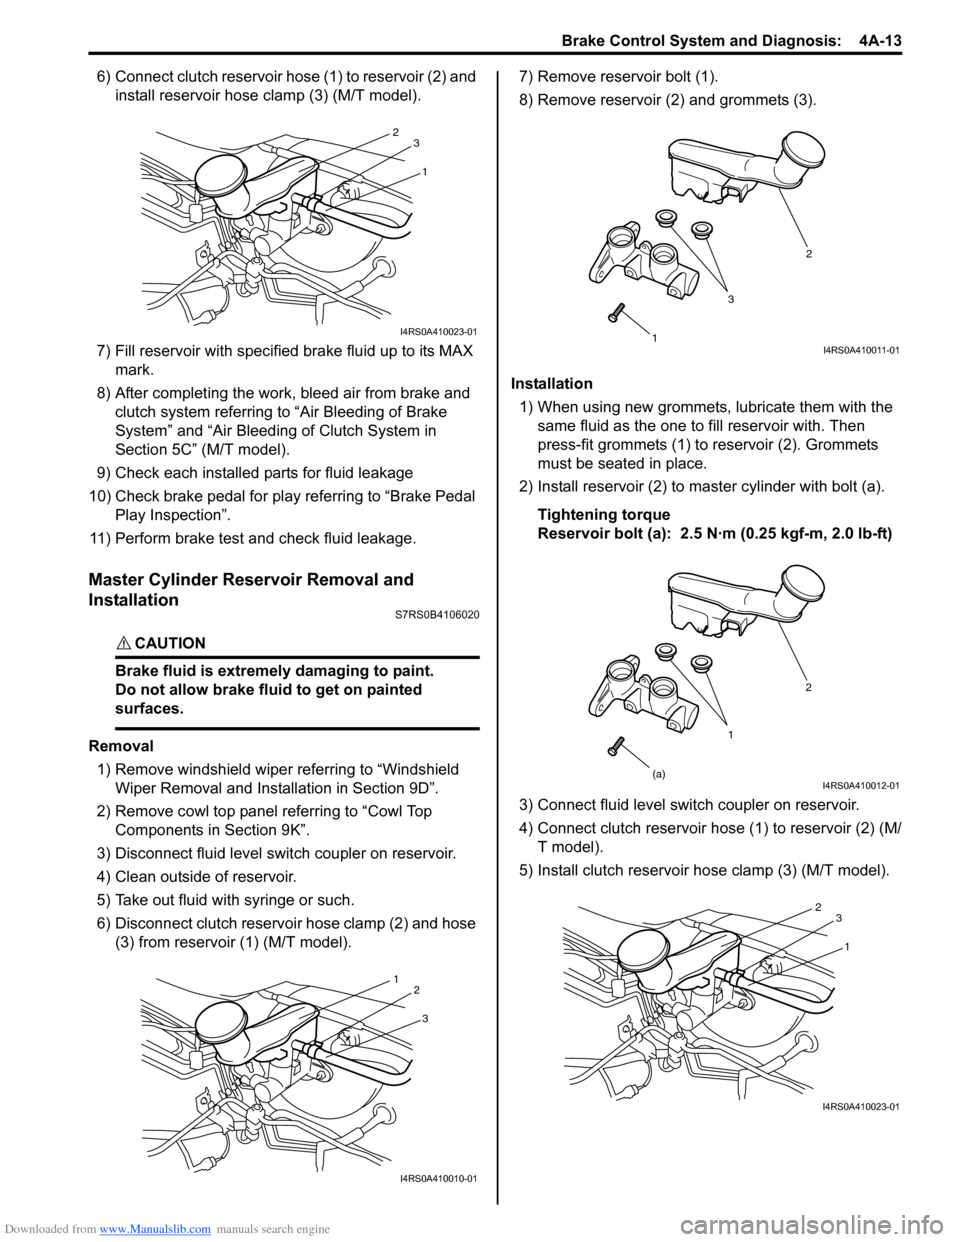 SUZUKI SWIFT 2005 2.G Service Workshop Manual Downloaded from www.Manualslib.com manuals search engine Brake Control System and Diagnosis:  4A-13
6) Connect clutch reservoir hose (1) to reservoir (2) and install reservoir hose clamp (3) (M/T mode